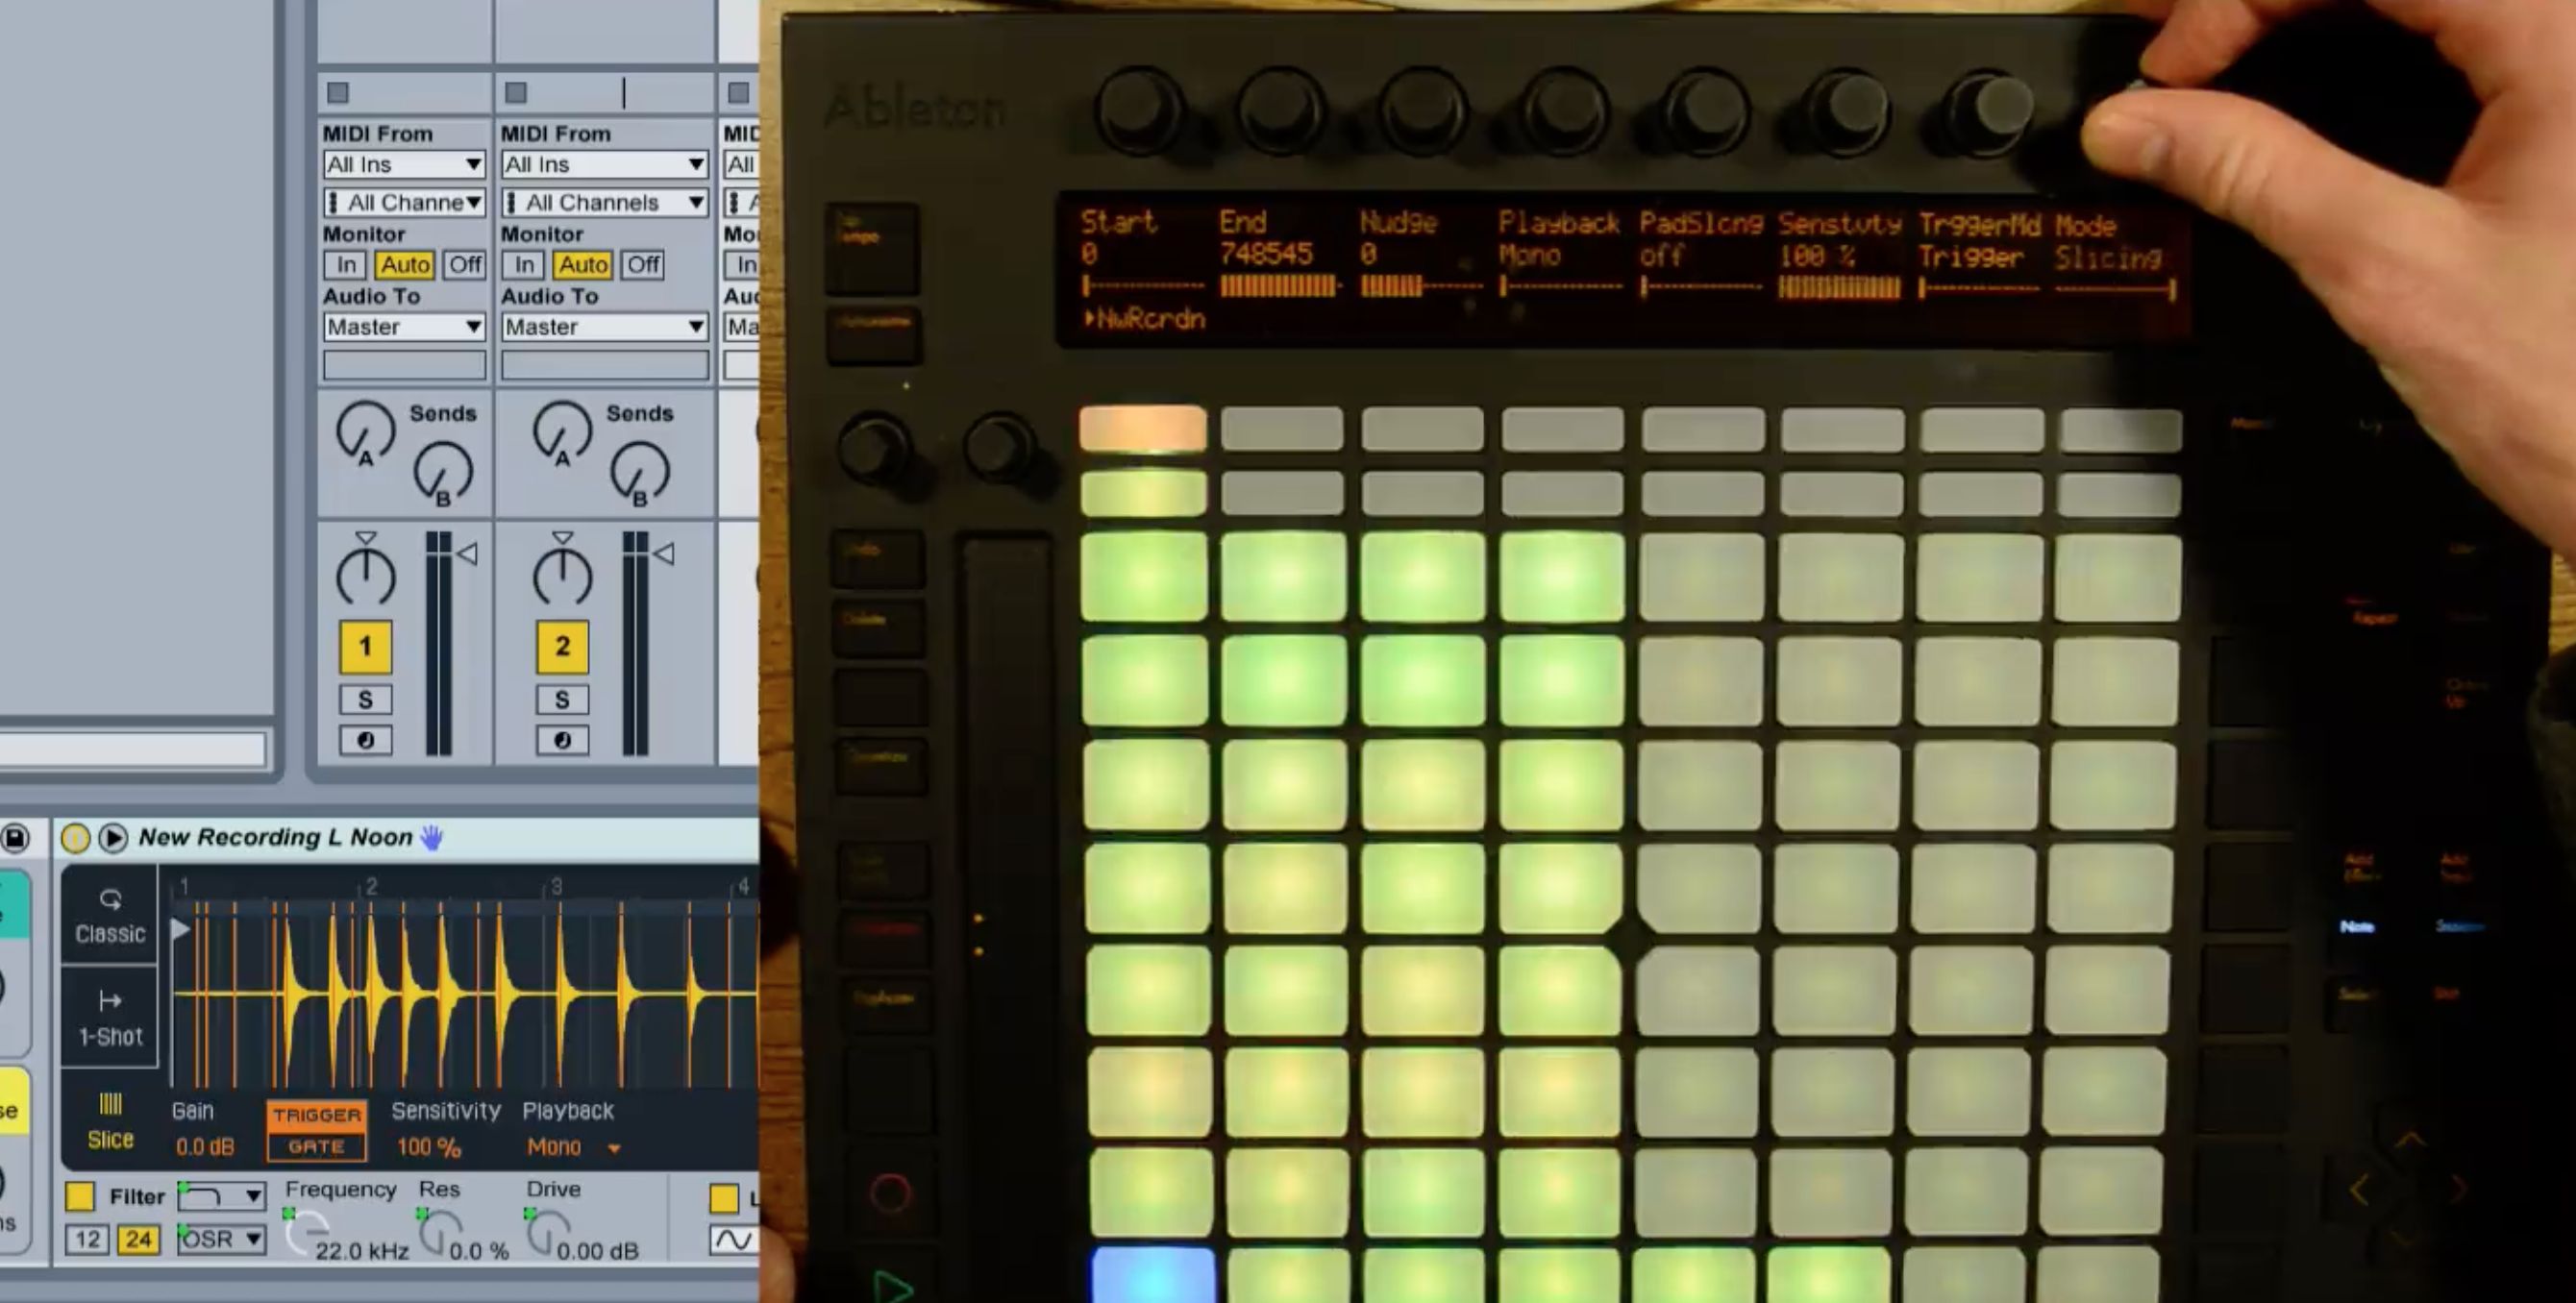 Ableton Push 1 Owners: These Improvements Will Make You Happy